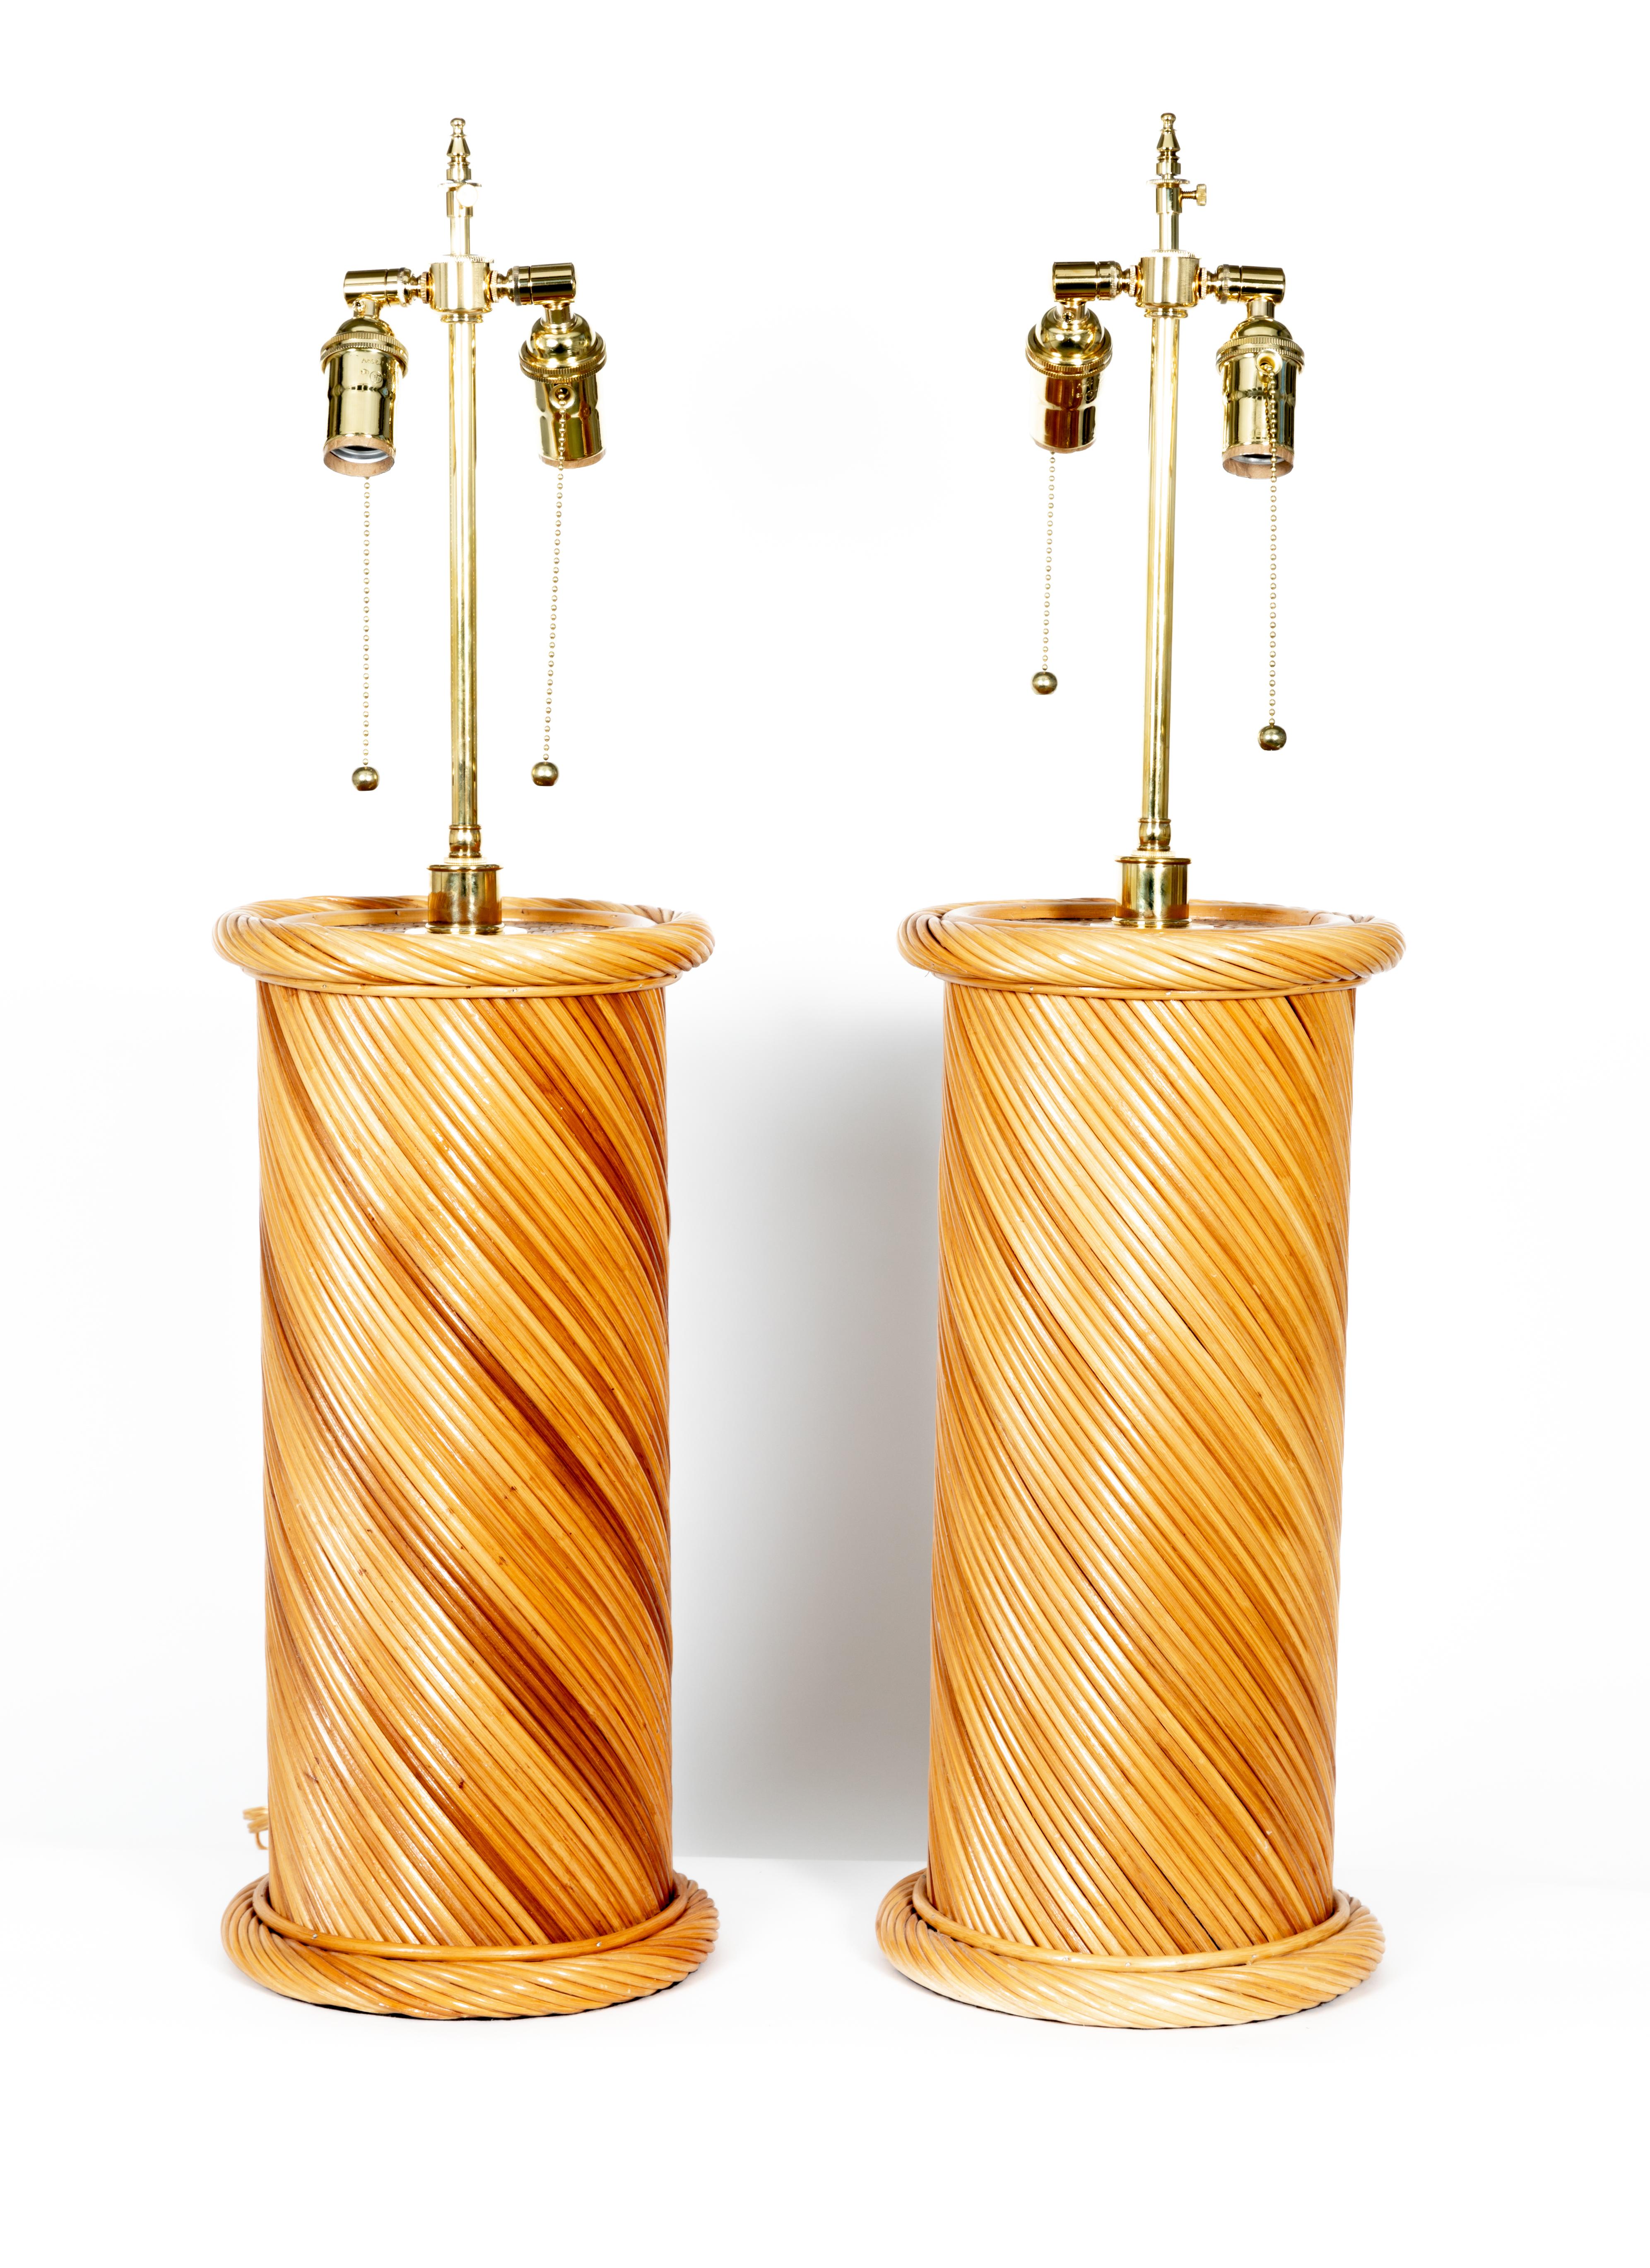 American Pair of Rattan Woven Table Lamps with Brass Detail